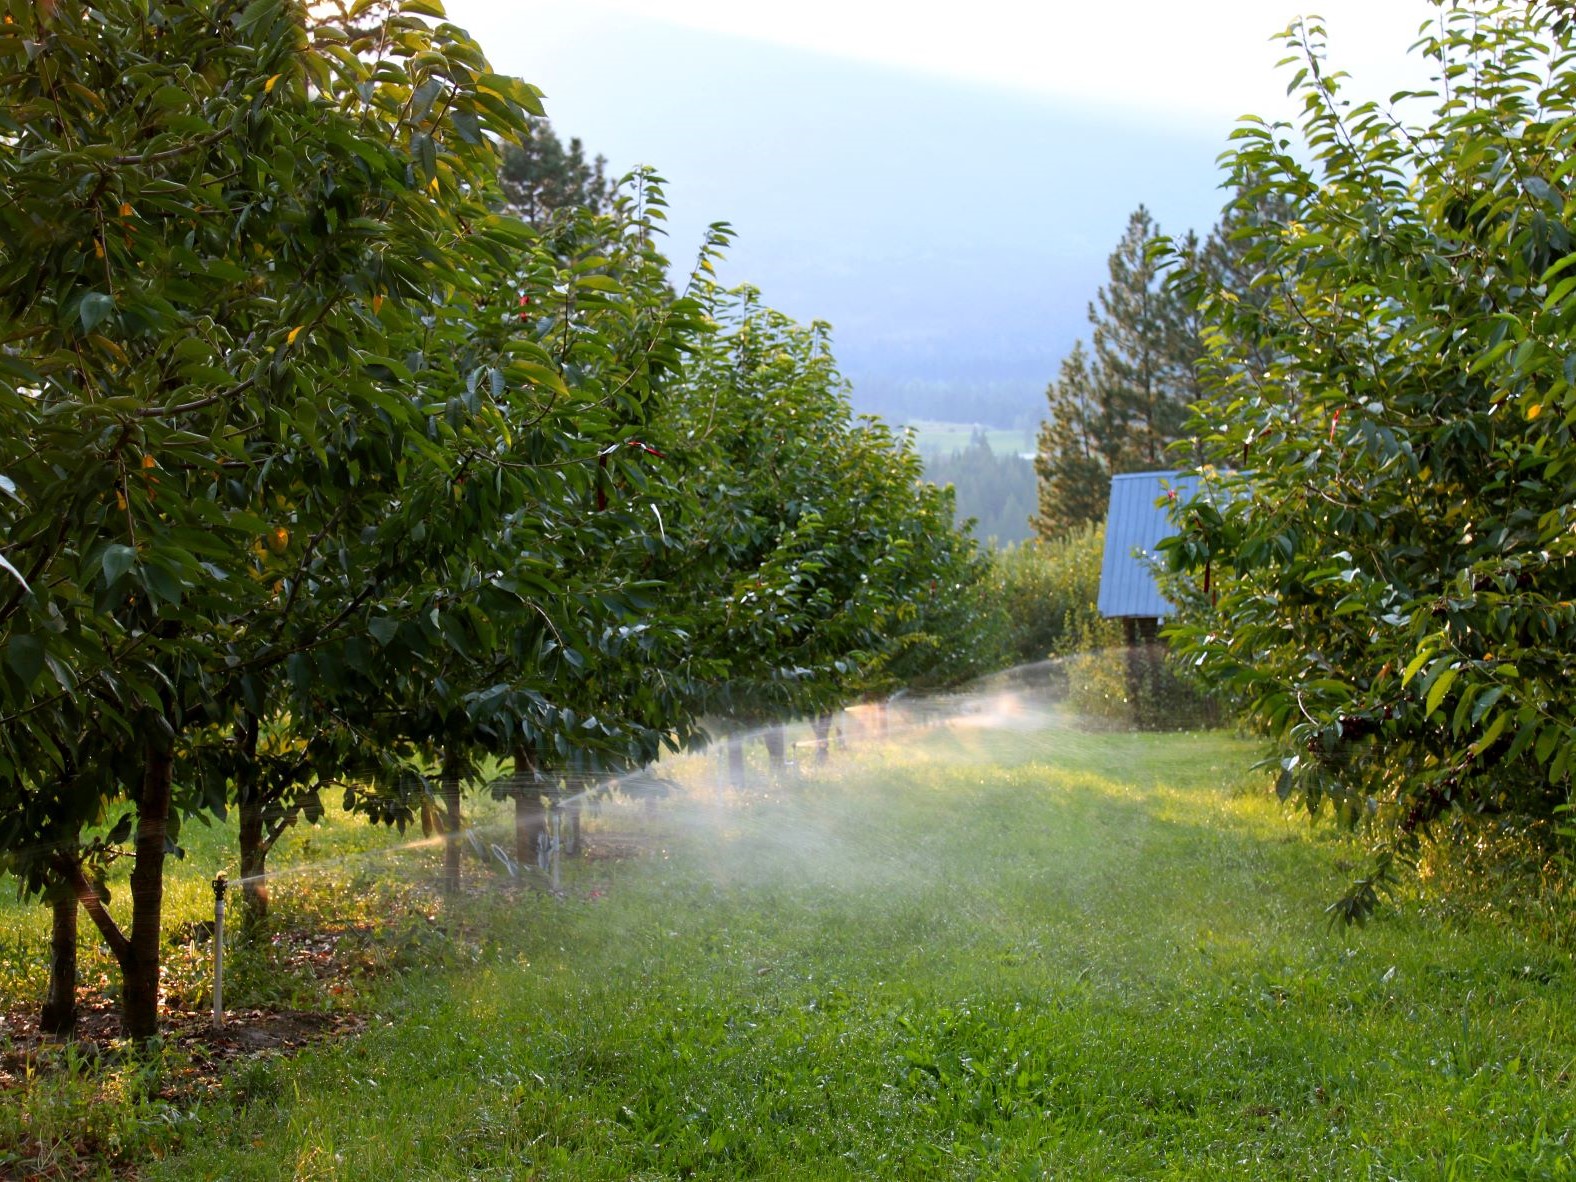 Irrigating an orchard